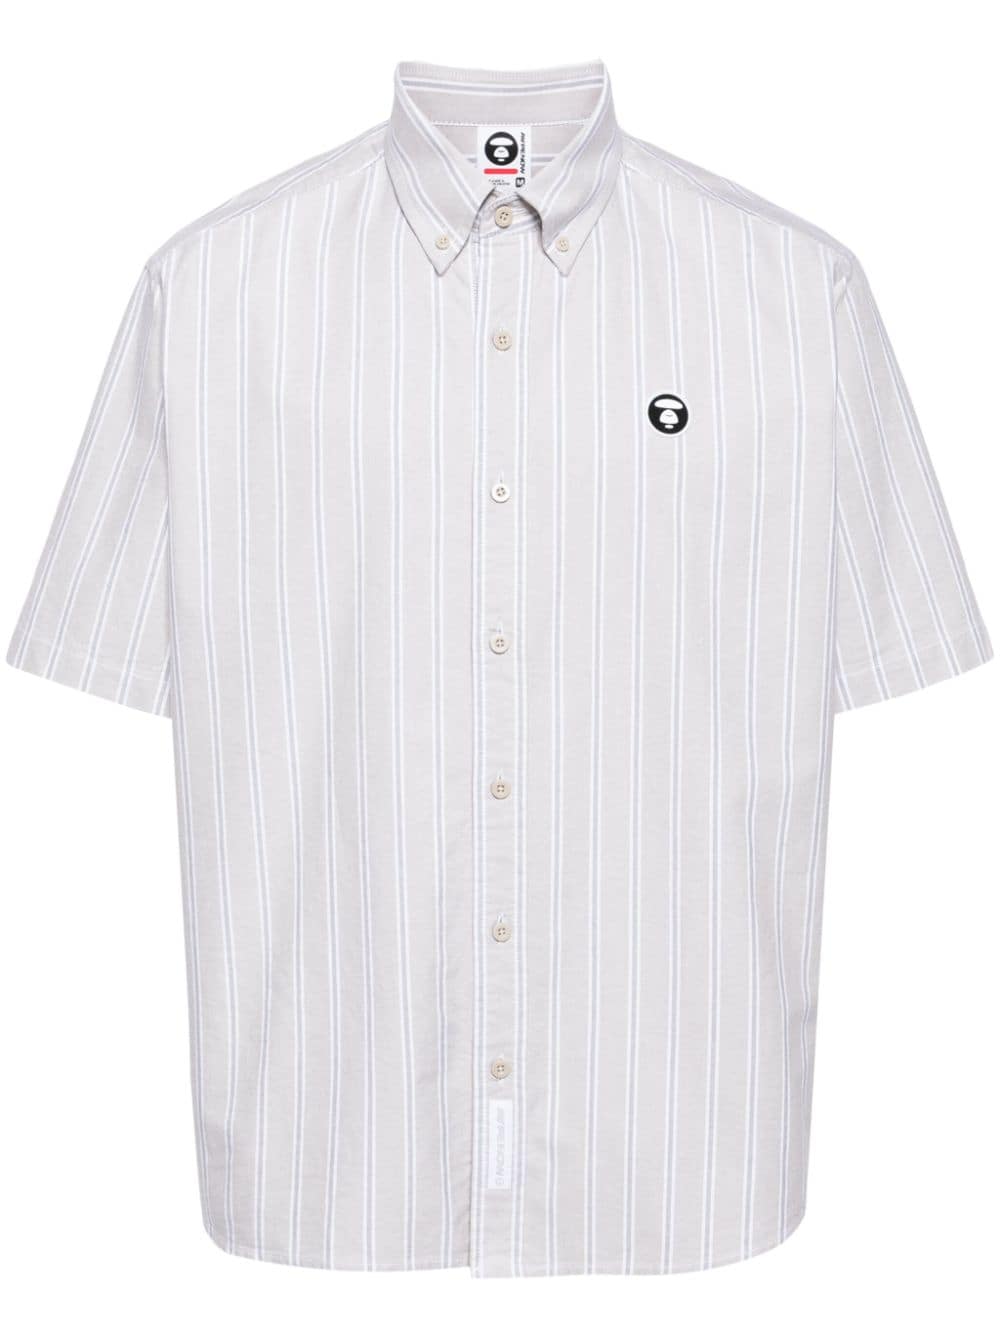 AAPE BY *A BATHING APE® striped cotton shirt - Neutrals von AAPE BY *A BATHING APE®